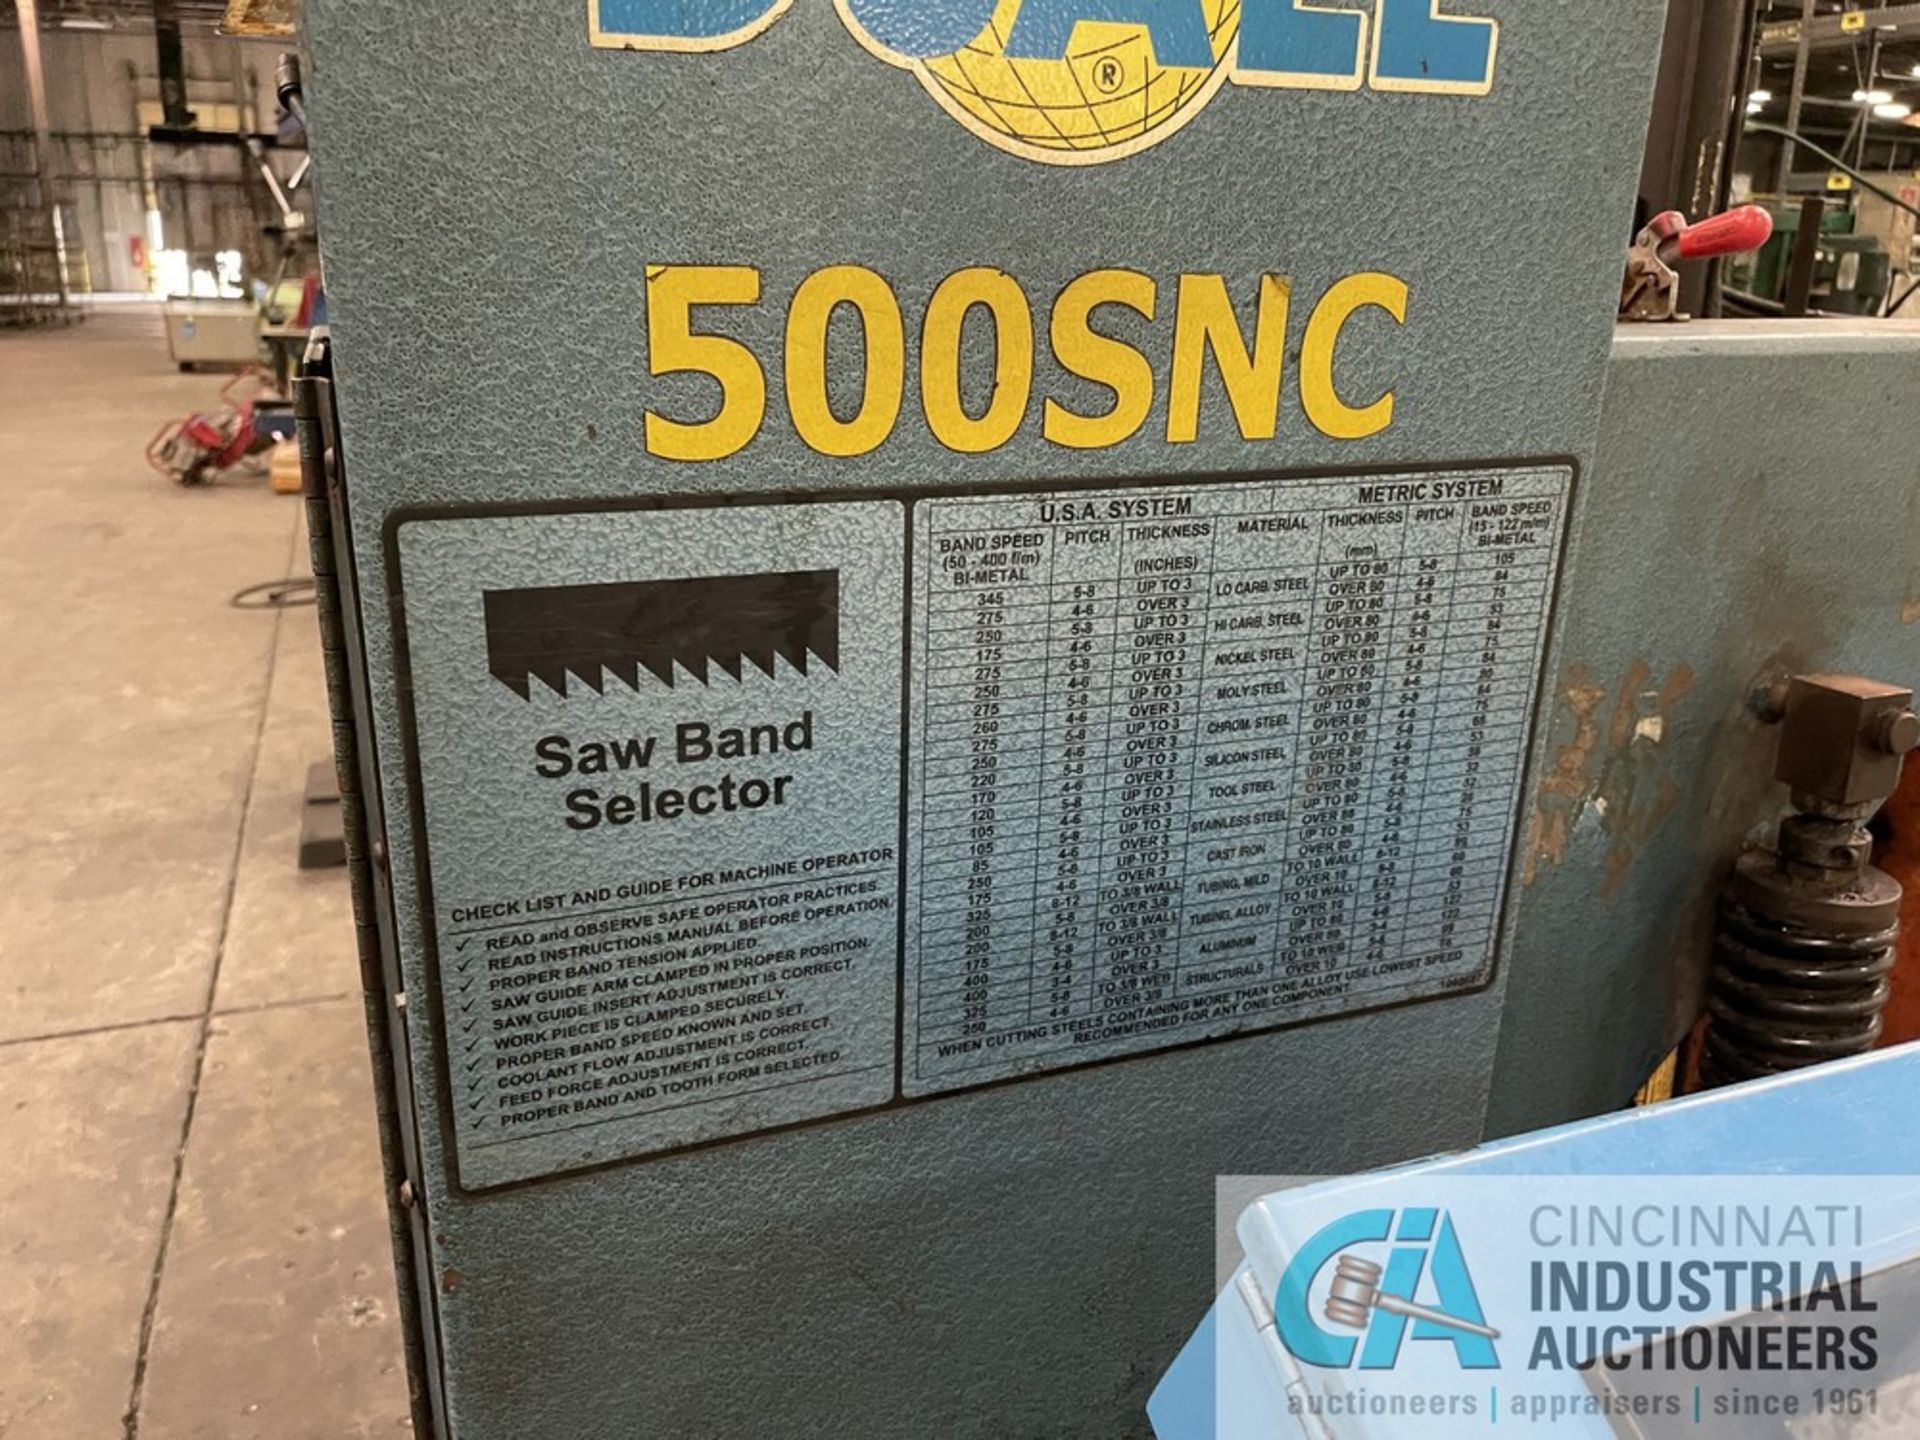 14 X 20 DOALL 500 SNC HORIZONTAL BAND SAW (2012) S/N 59212151, 60" POWER ROLLER CONVEYOR AND POWER - Image 5 of 9